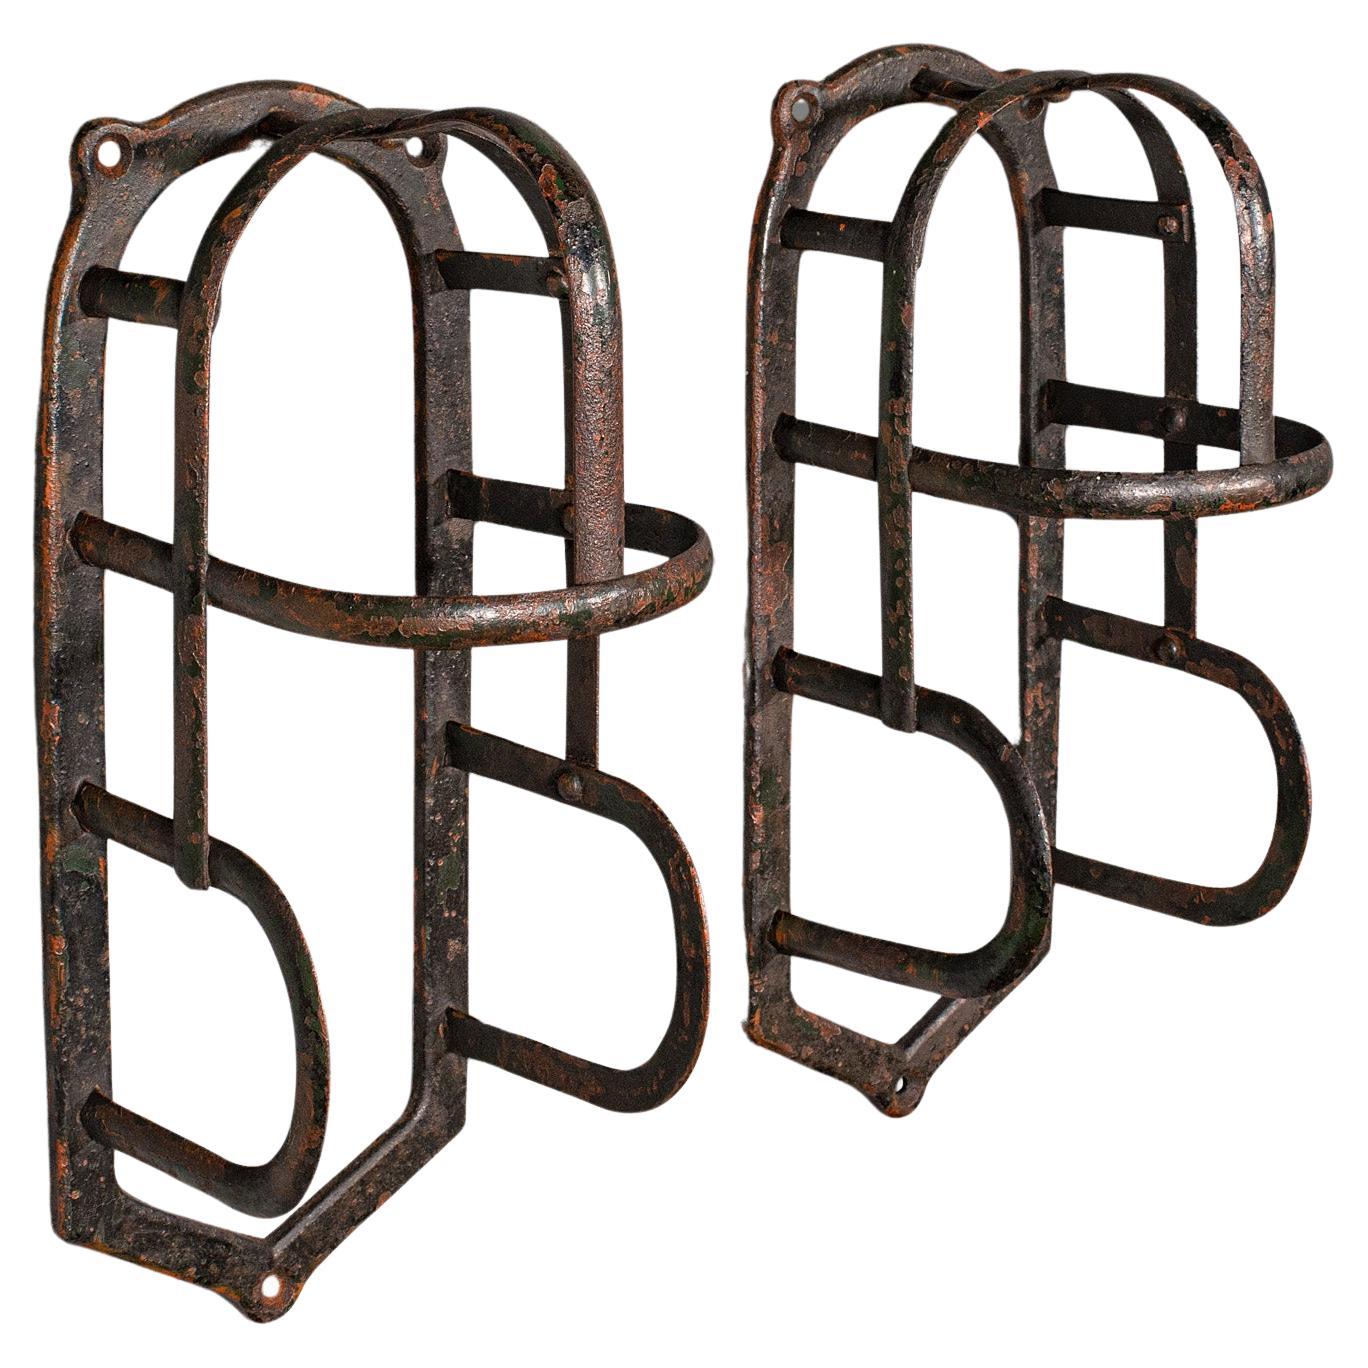 Pair Of Antique Equestrian Tack Rests, English Iron, Stables, Outdoor, Victorian For Sale